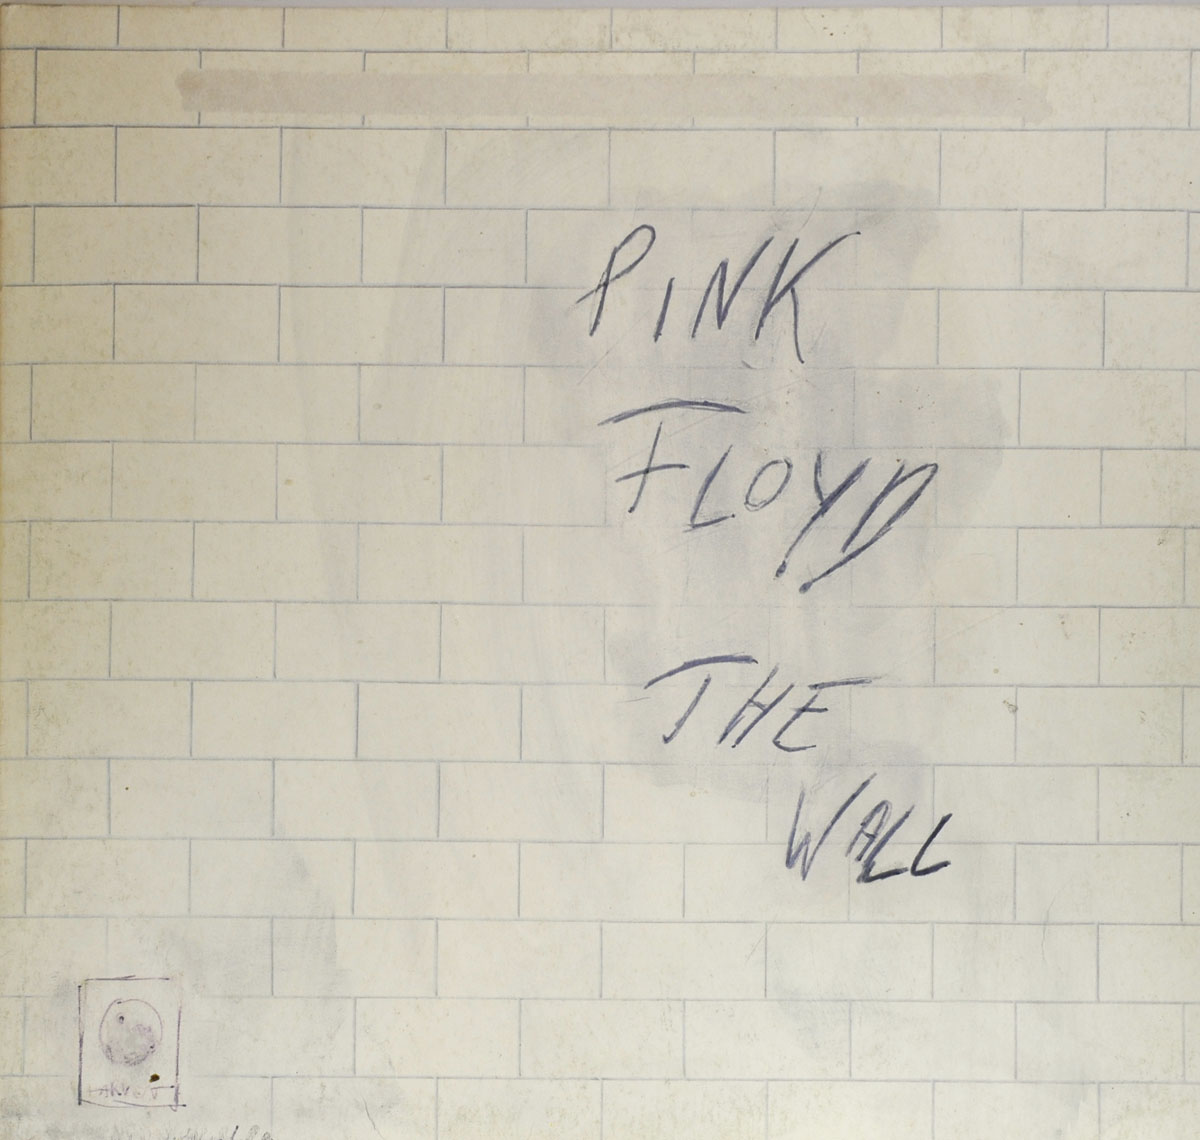 PINK FLOYD The Wall French Release Album Cover Gallery & 12 Vinyl LP  Discography Information #vinylrecords